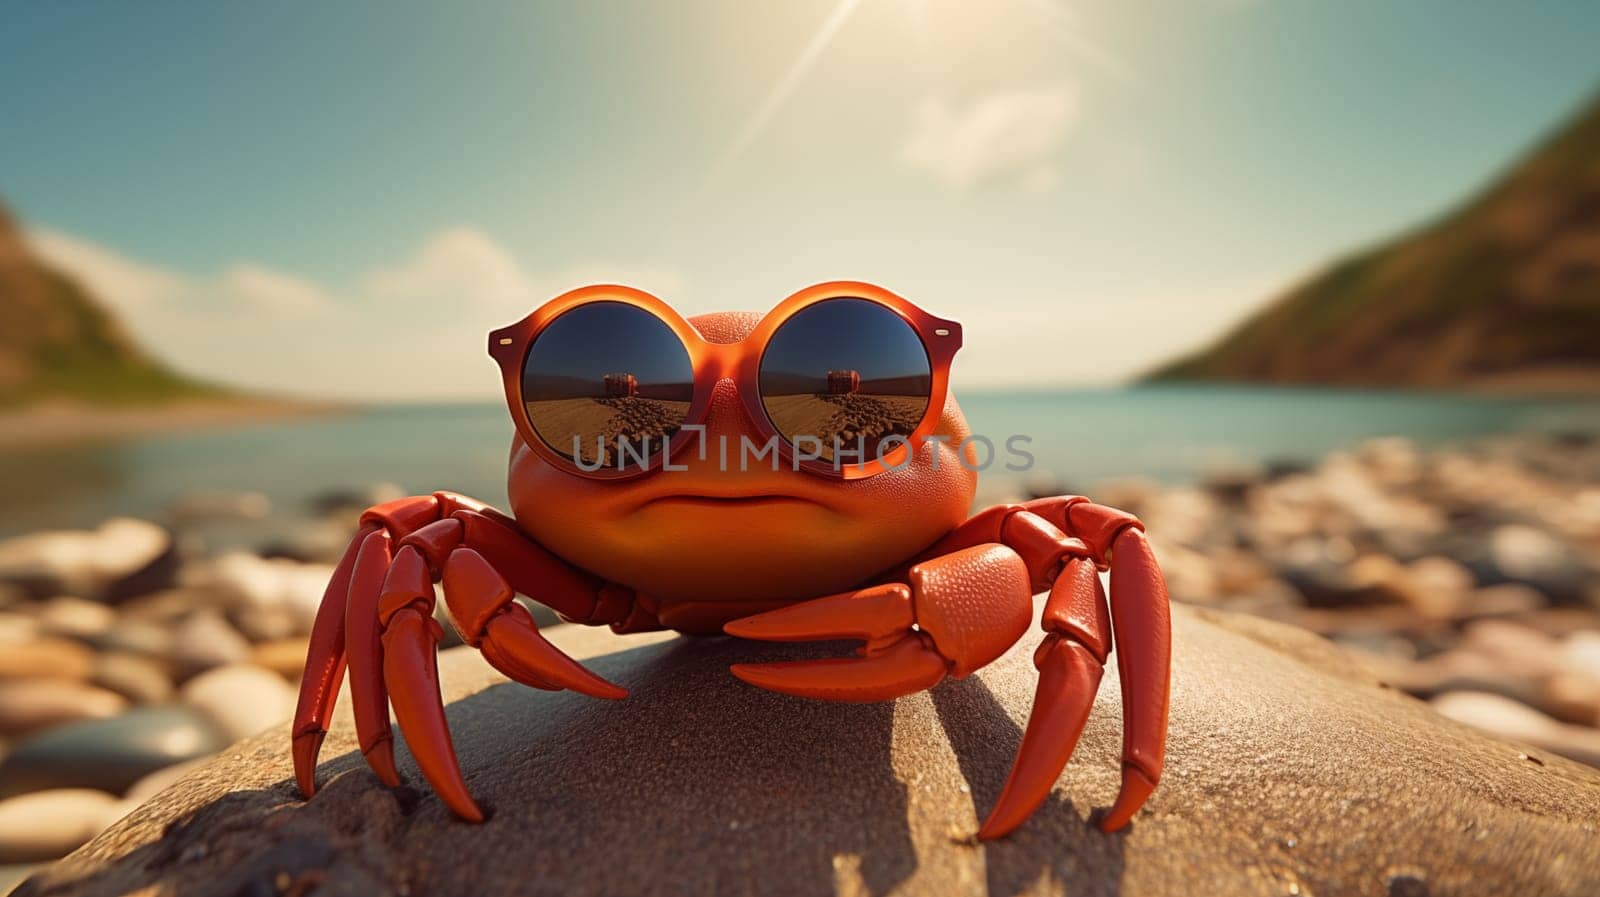 A whimsical crab donning sunglasses, basking on a pebbly beach by Zakharova